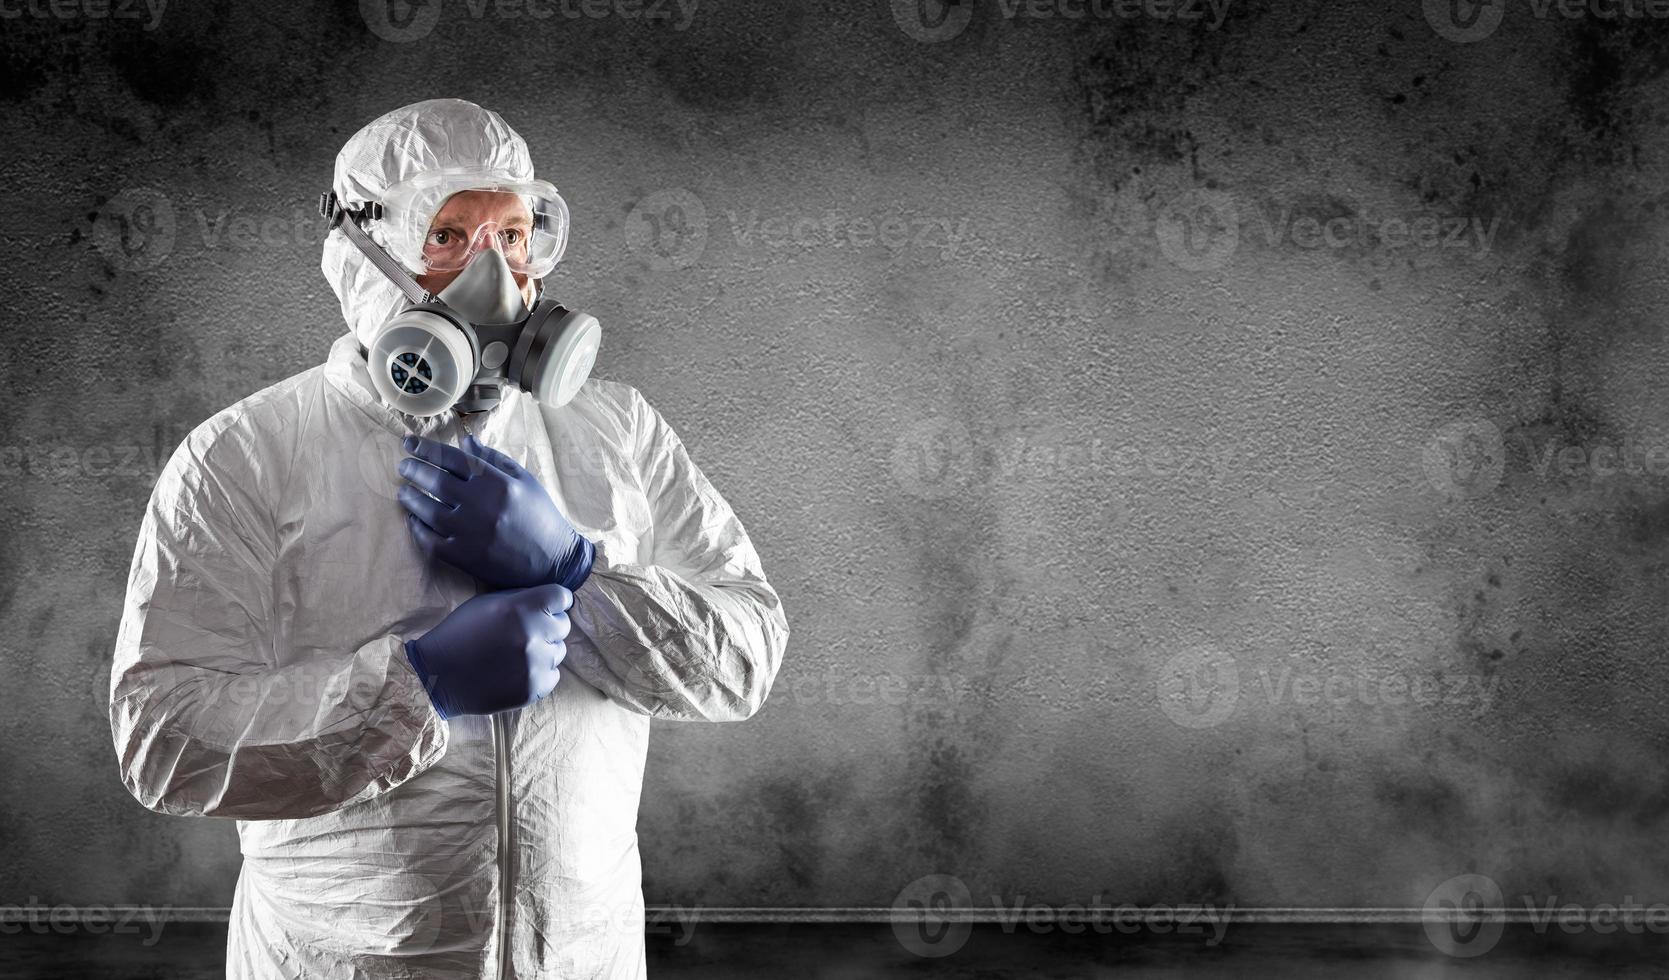 Man Wearing Hazmat Suit, Protective Gas Mask and Goggles Against Dark Wall photo